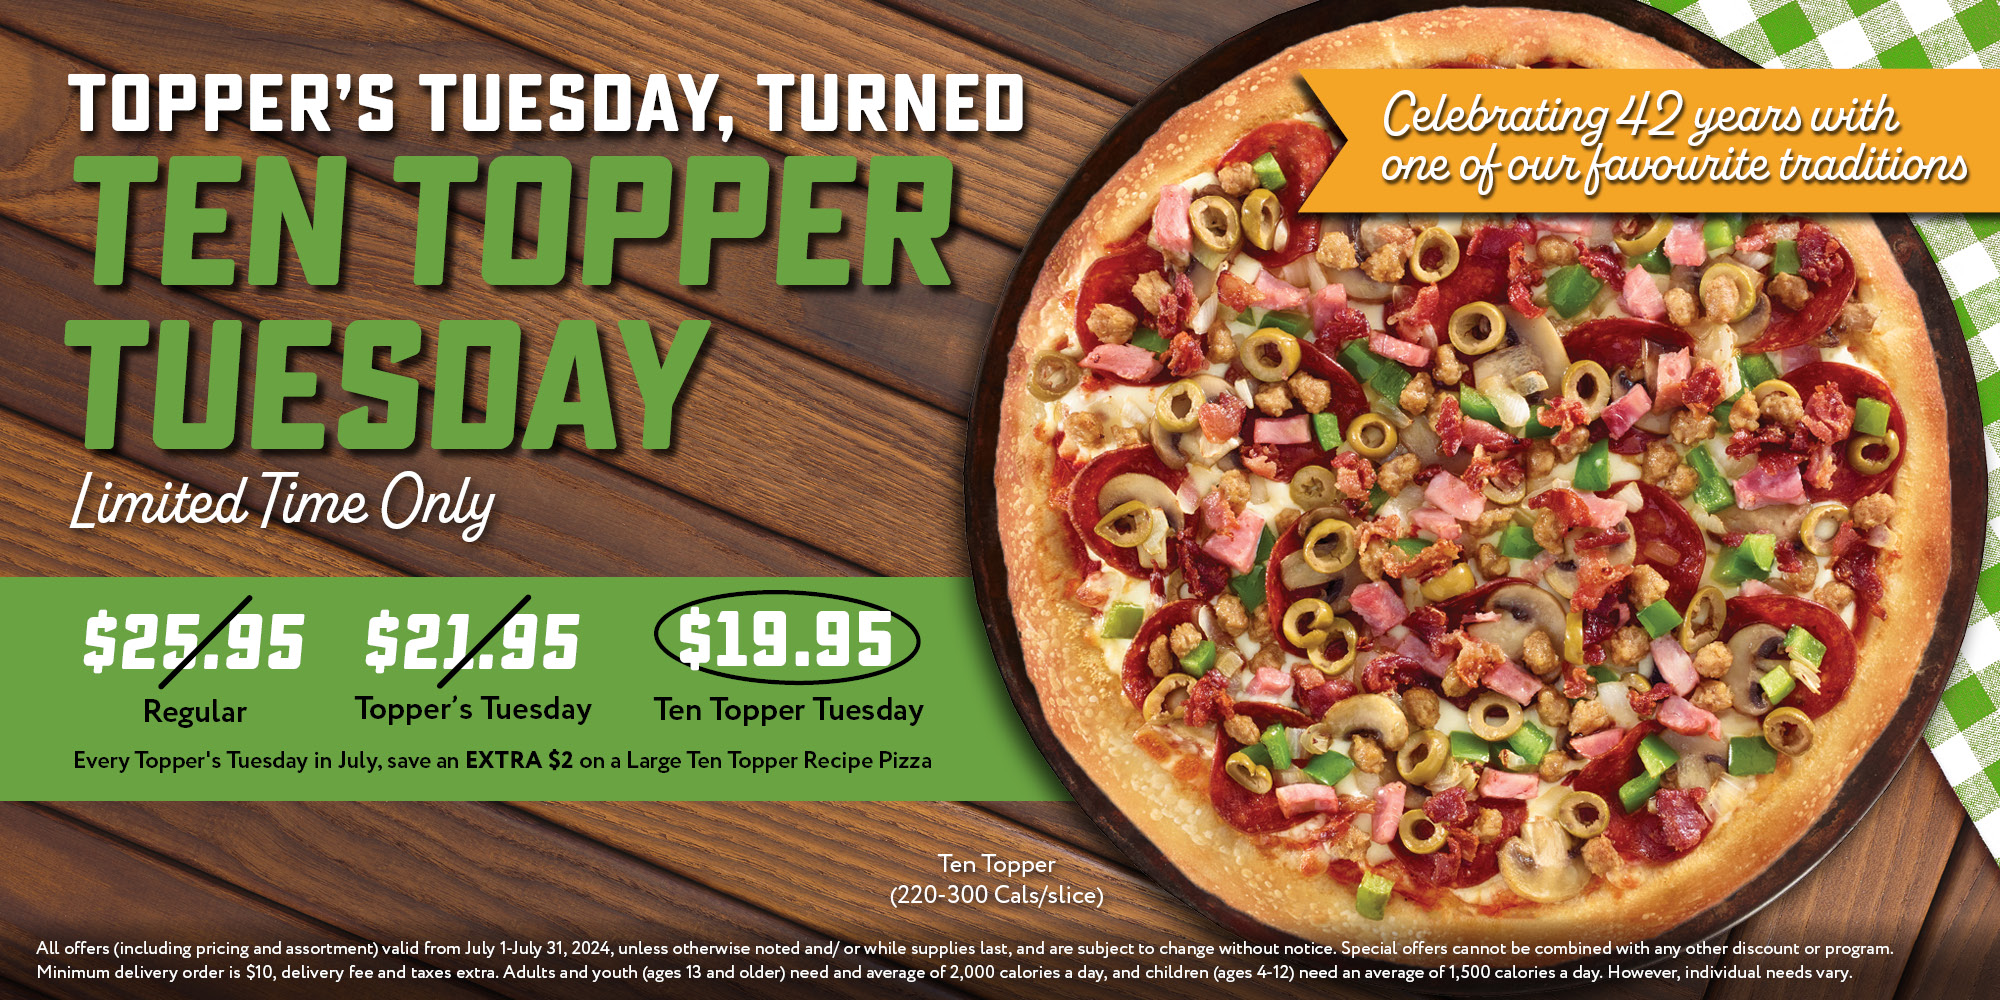 Save an extra $2 on a large ten toppers pizza on every Tuesday